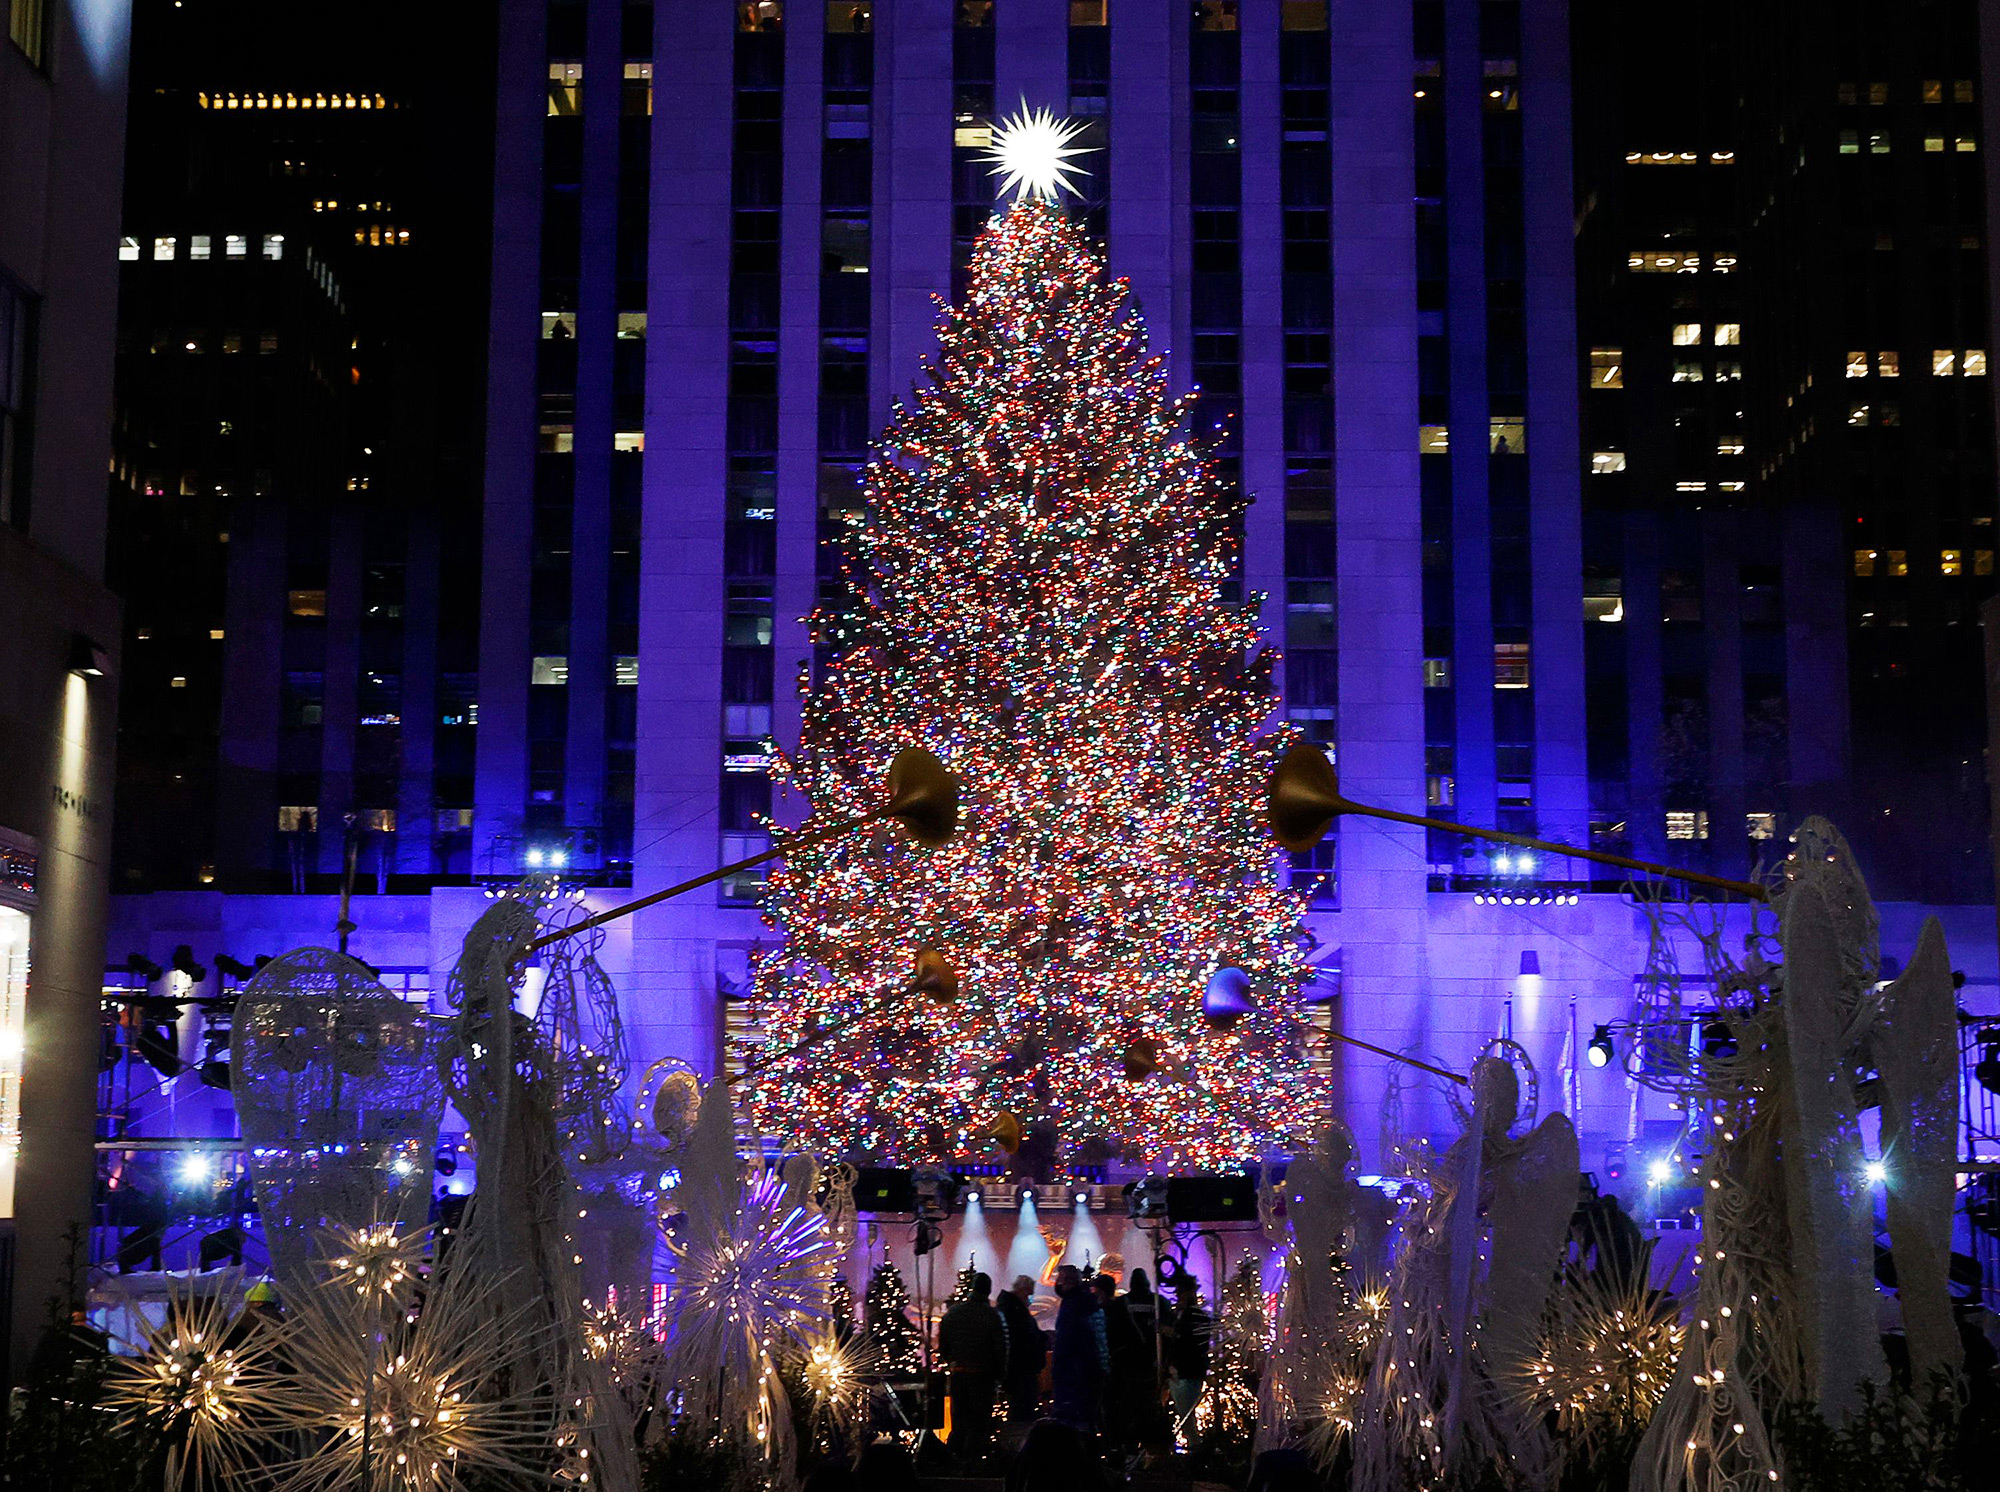 When do they light the tree at Rockefeller Center?